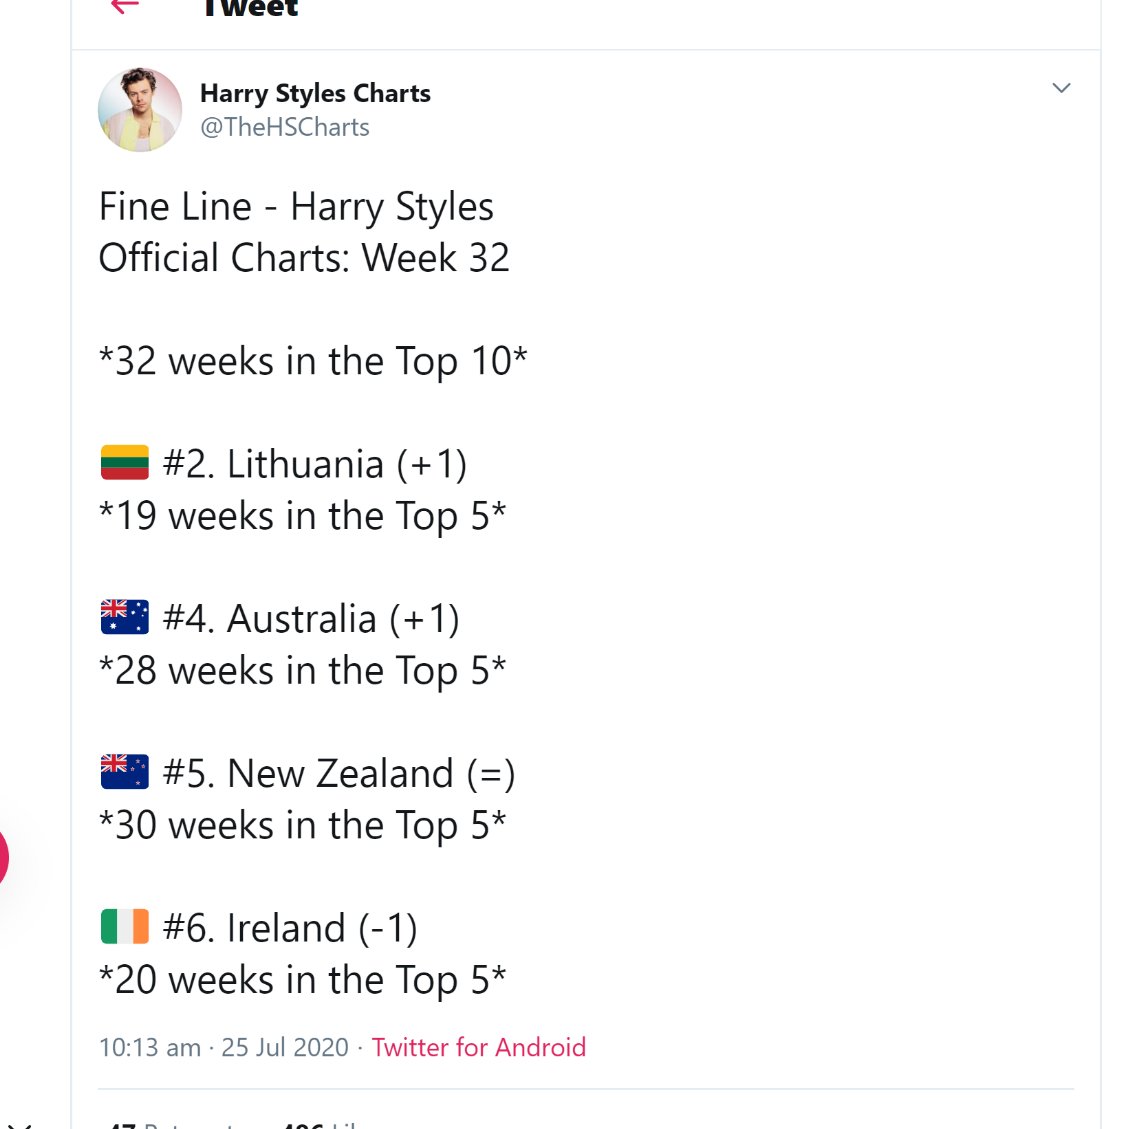 "Fine Line" spends its 32nd week in the top 10 as well in NZ (#5), ARIA chart Australia (#4), Ireland (#6) and more. it has spent its entire run in the top 10 in Australia, Ireland and NZ, over 7 months, most of the time in the top 5.